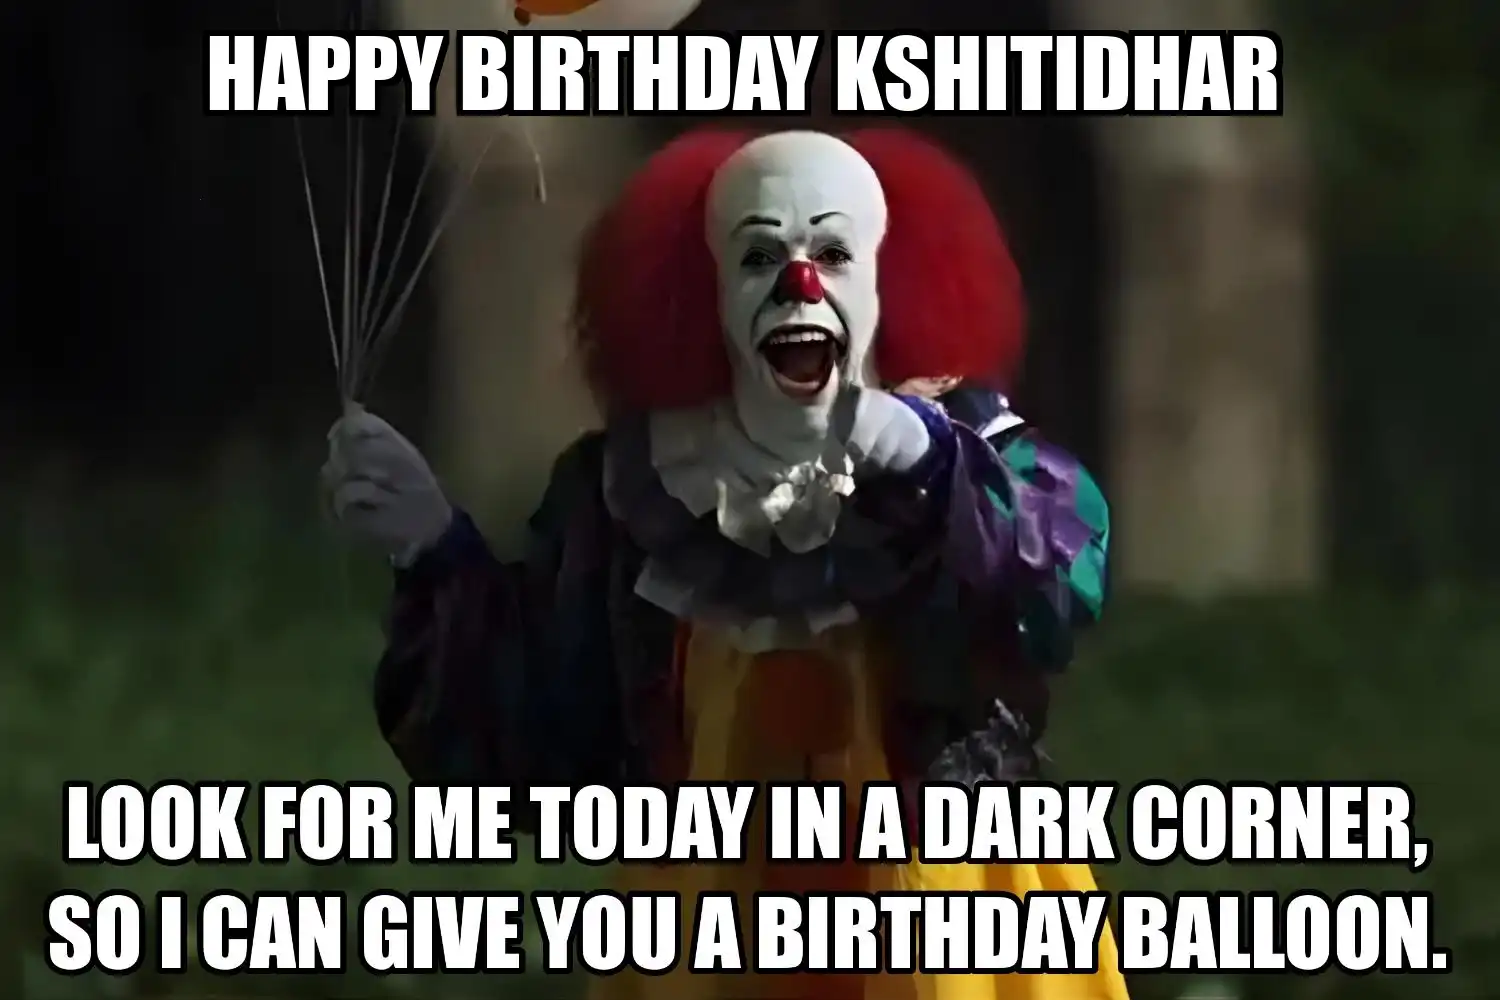 Happy Birthday Kshitidhar I Can Give You A Balloon Meme